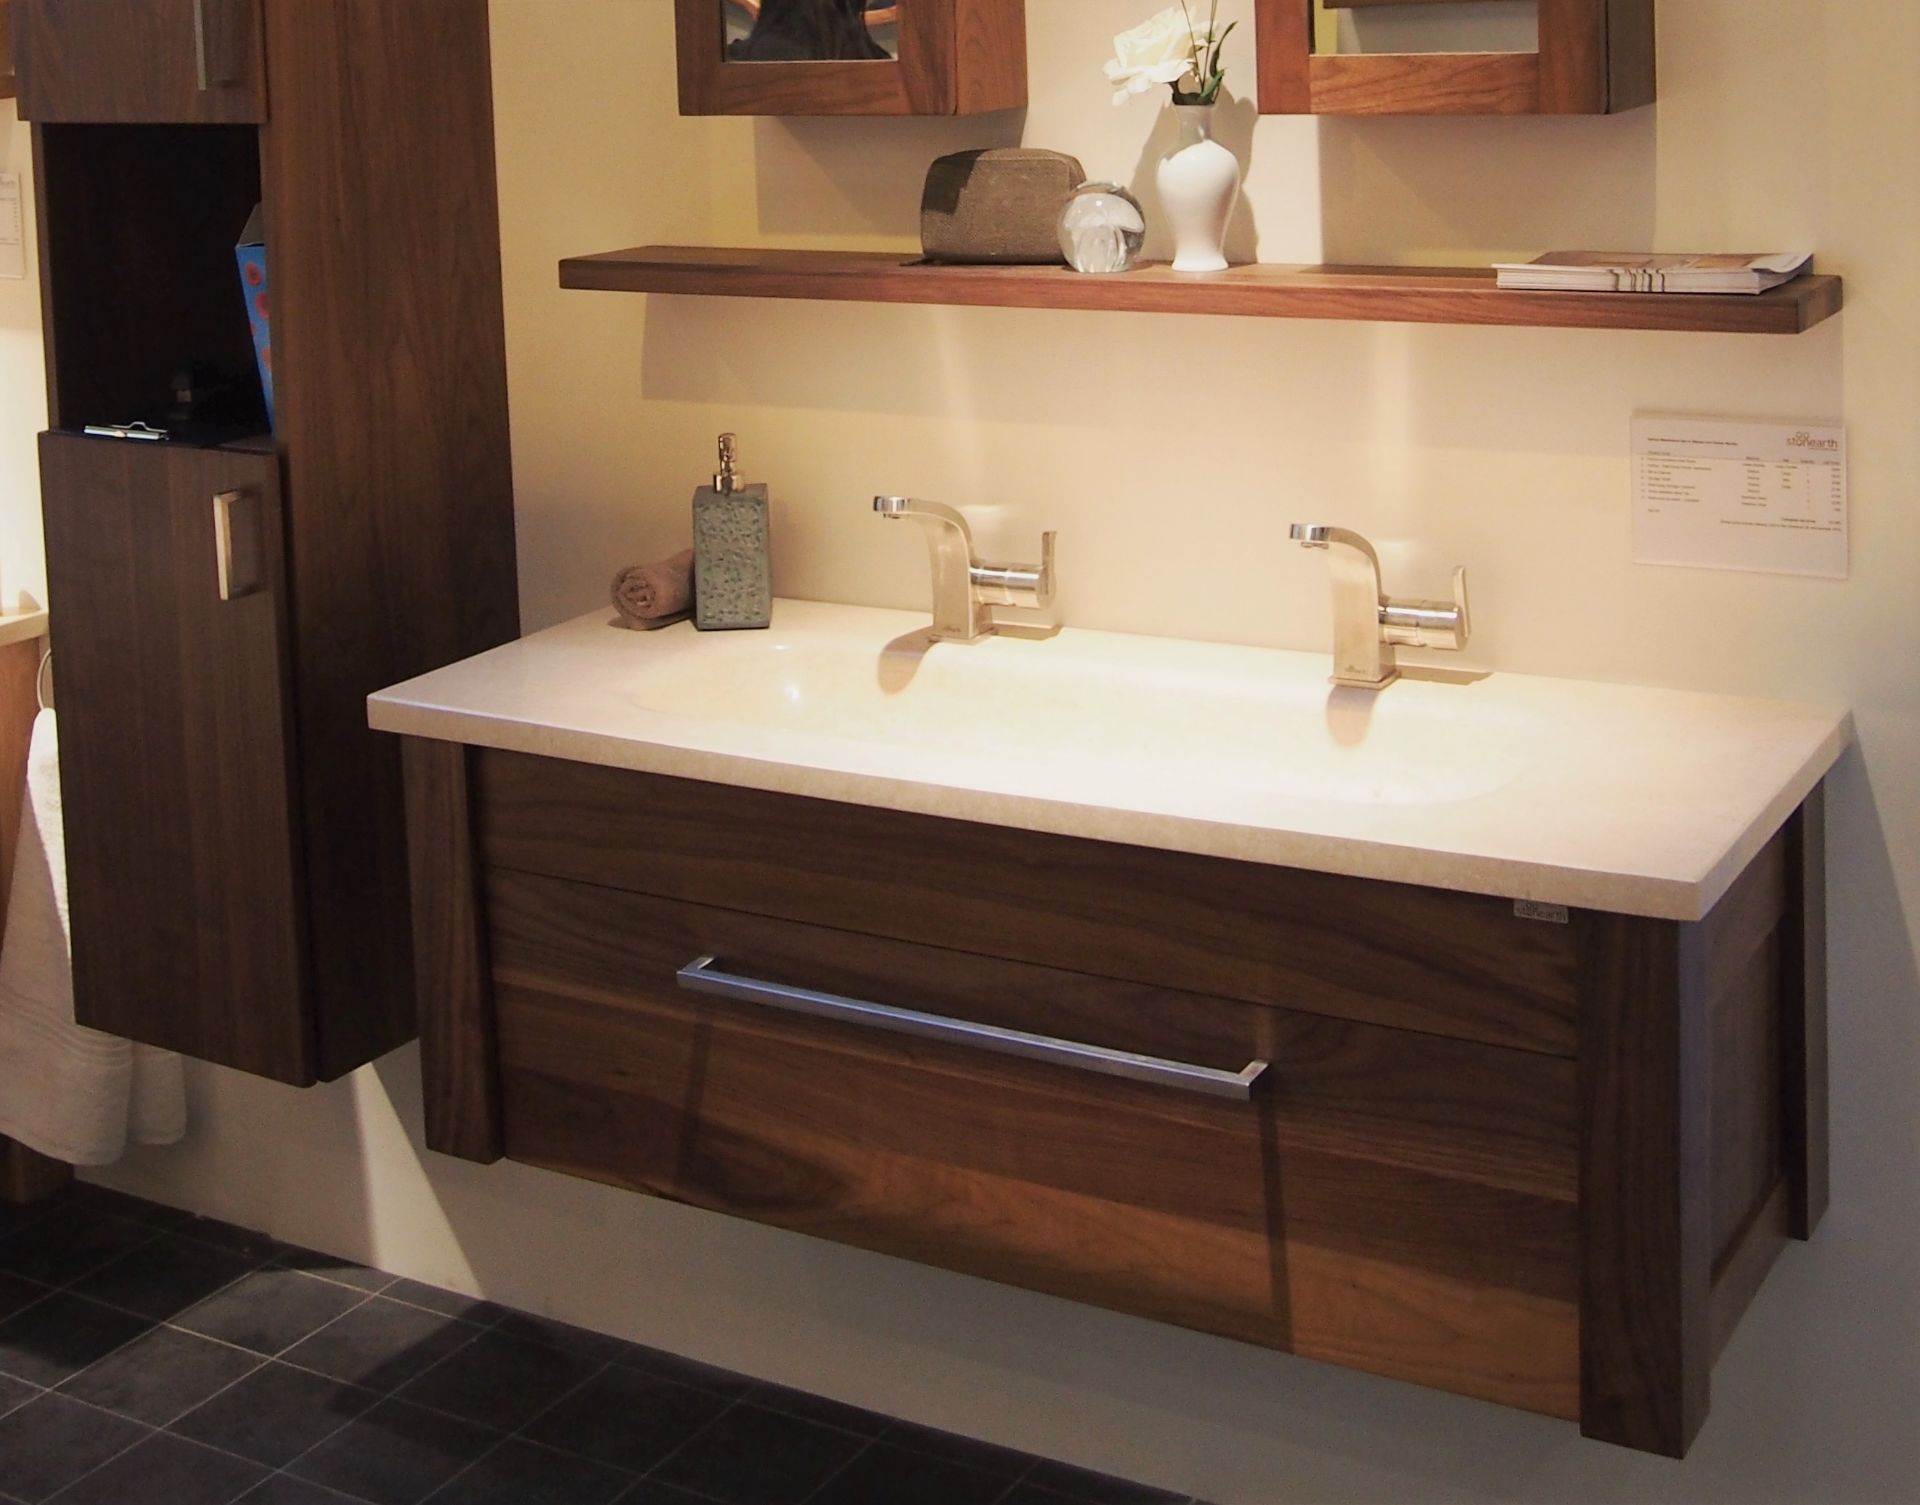 1 x Stonearth 'Venice' Wall Mounted 1200mm Walnut Washstand With Inset Marble Sink - RRP £2,500 - Image 10 of 10